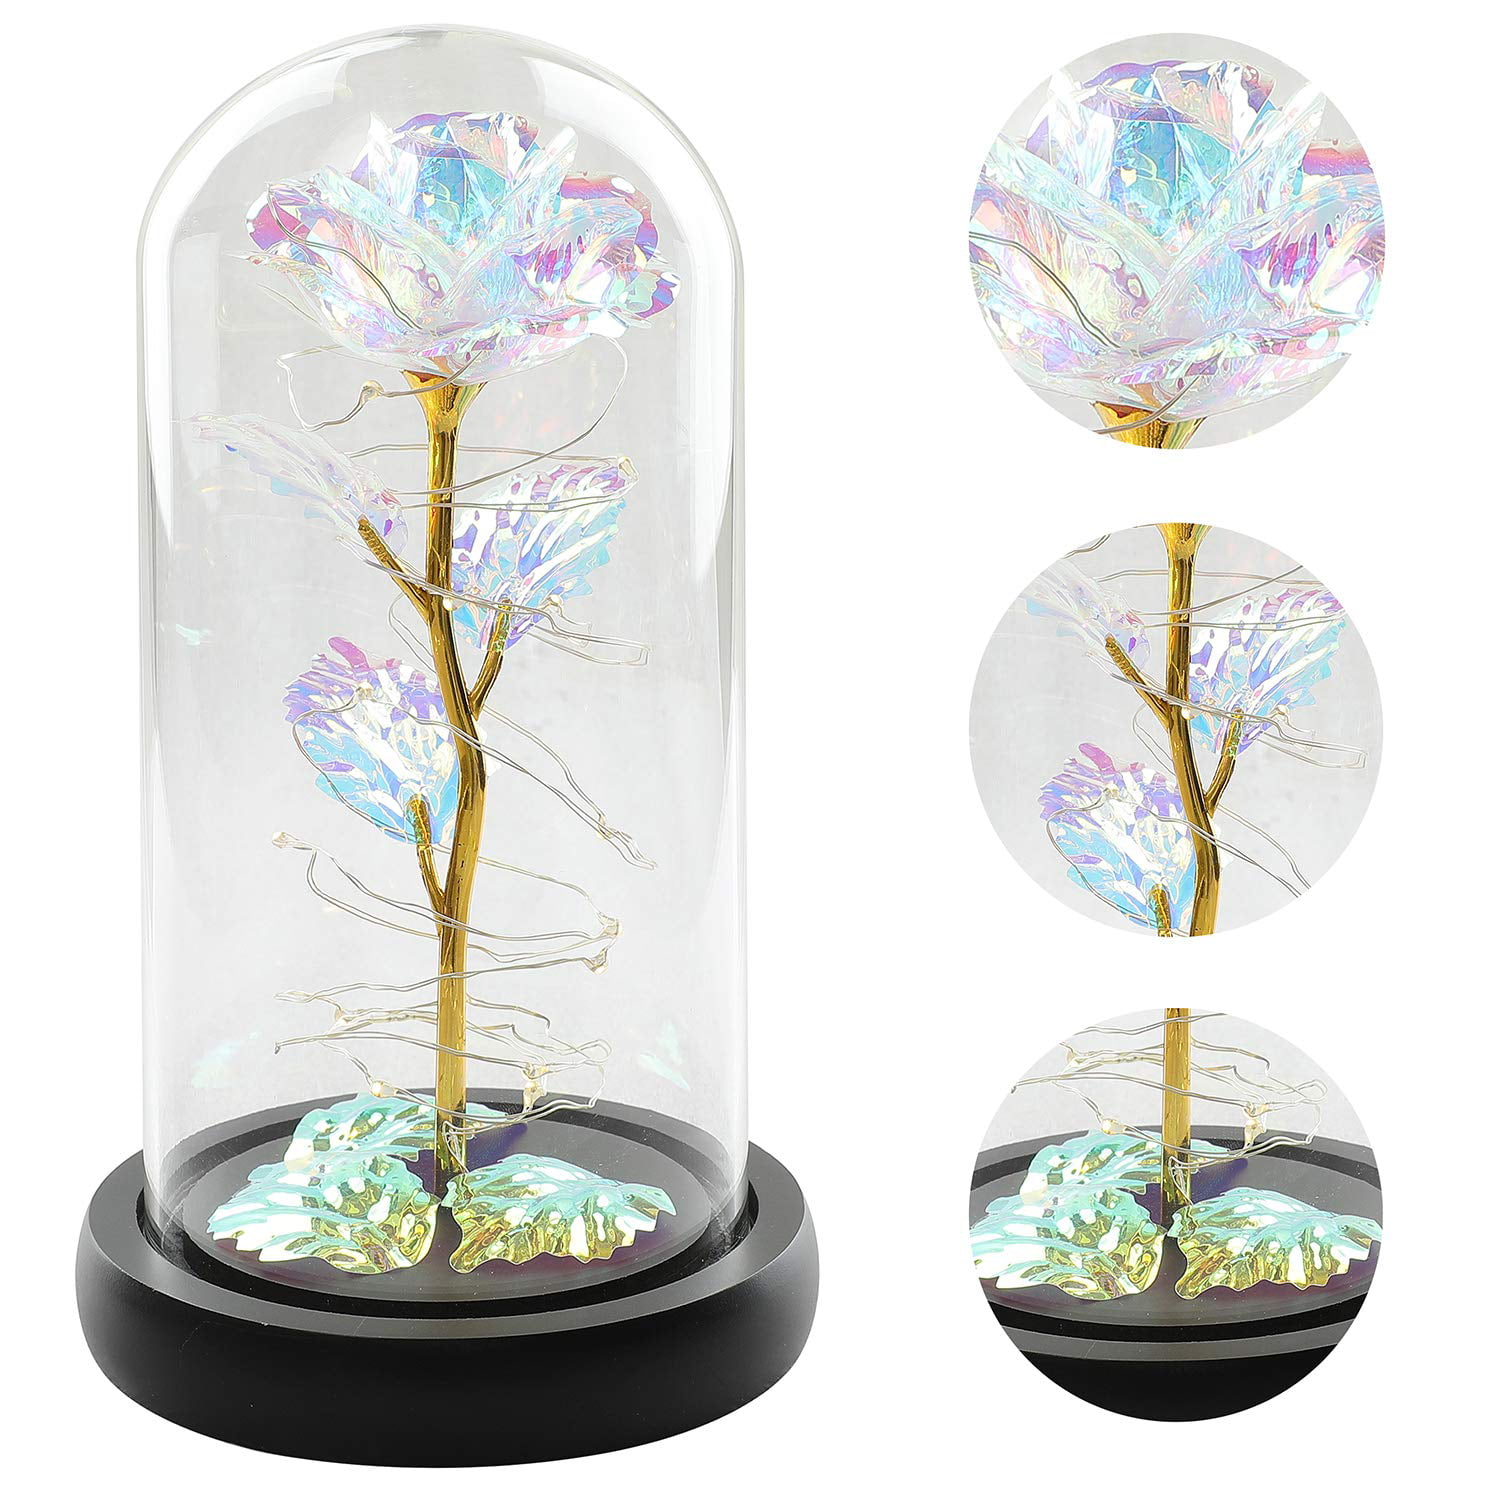 Roses Artificial Flowers Glass Box Dome Romantic Gifts for Wedding Home Decor